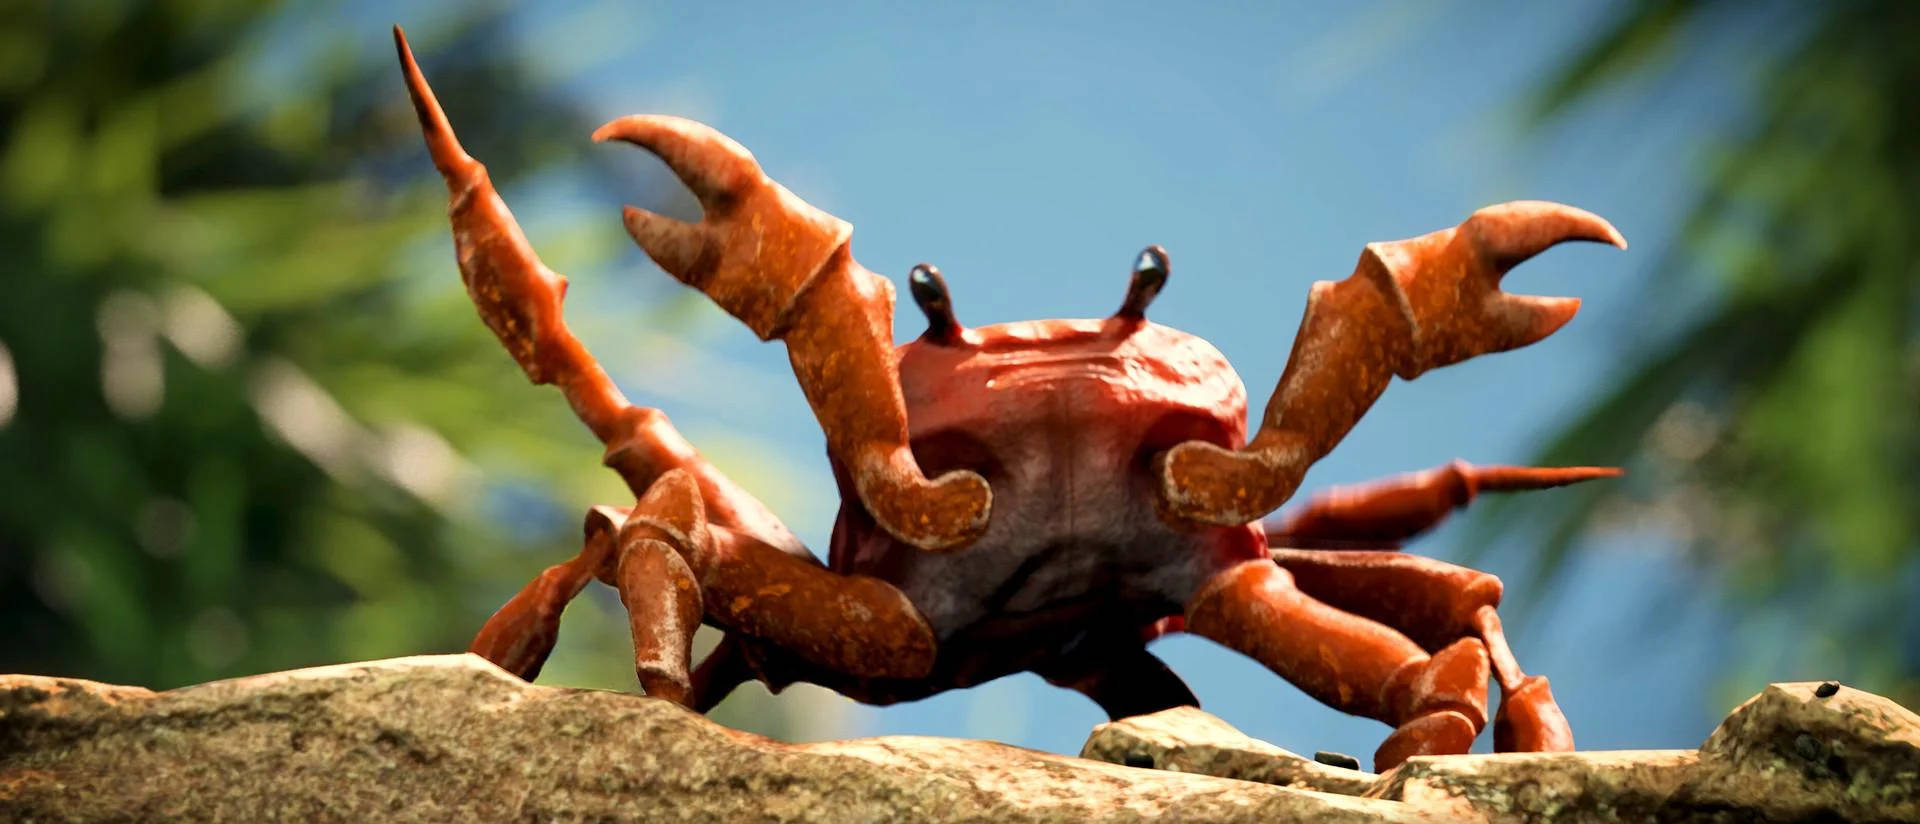 Crab On A Rock Background